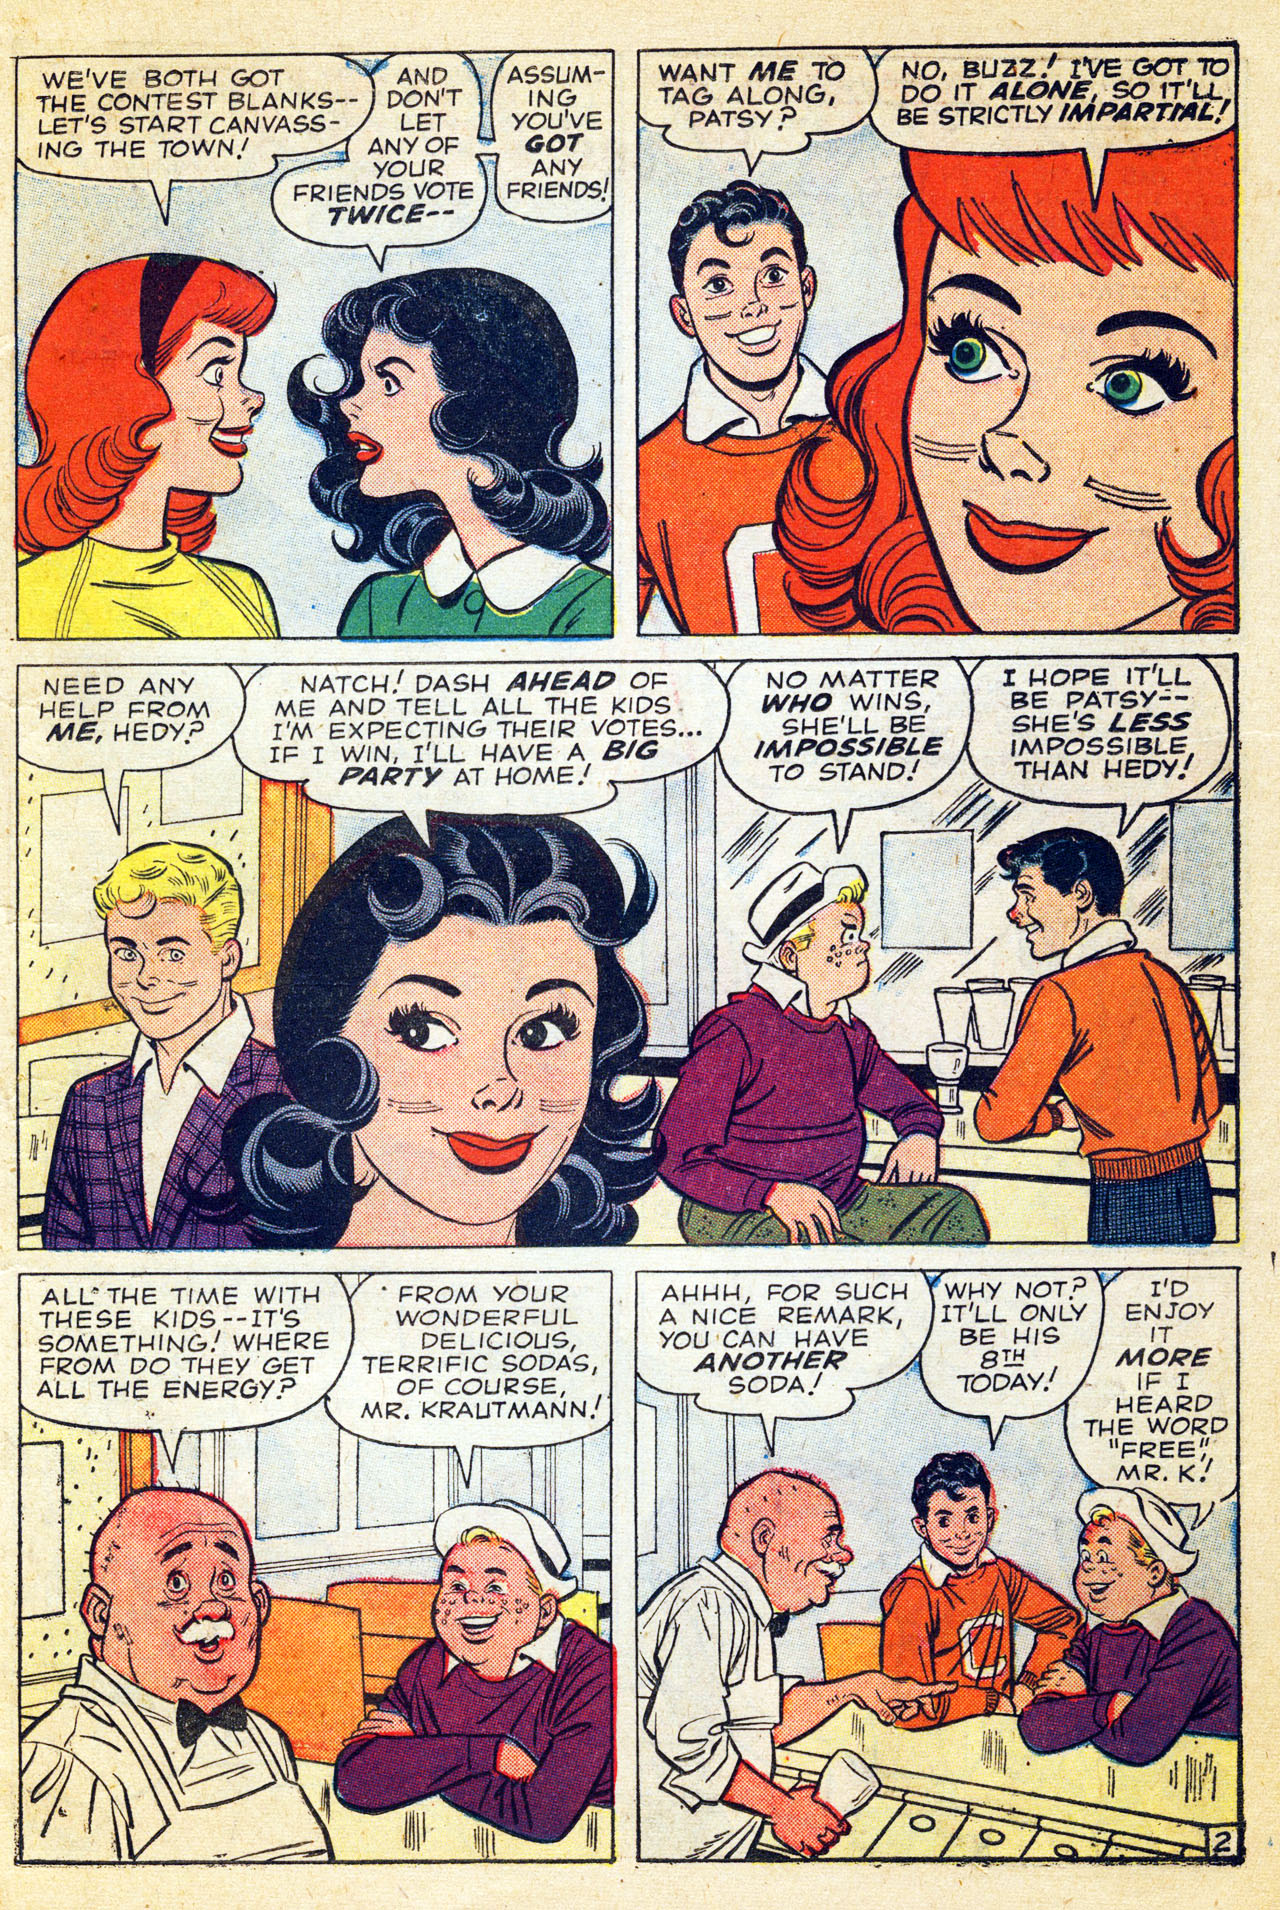 Read online Patsy and Hedy comic -  Issue #62 - 11